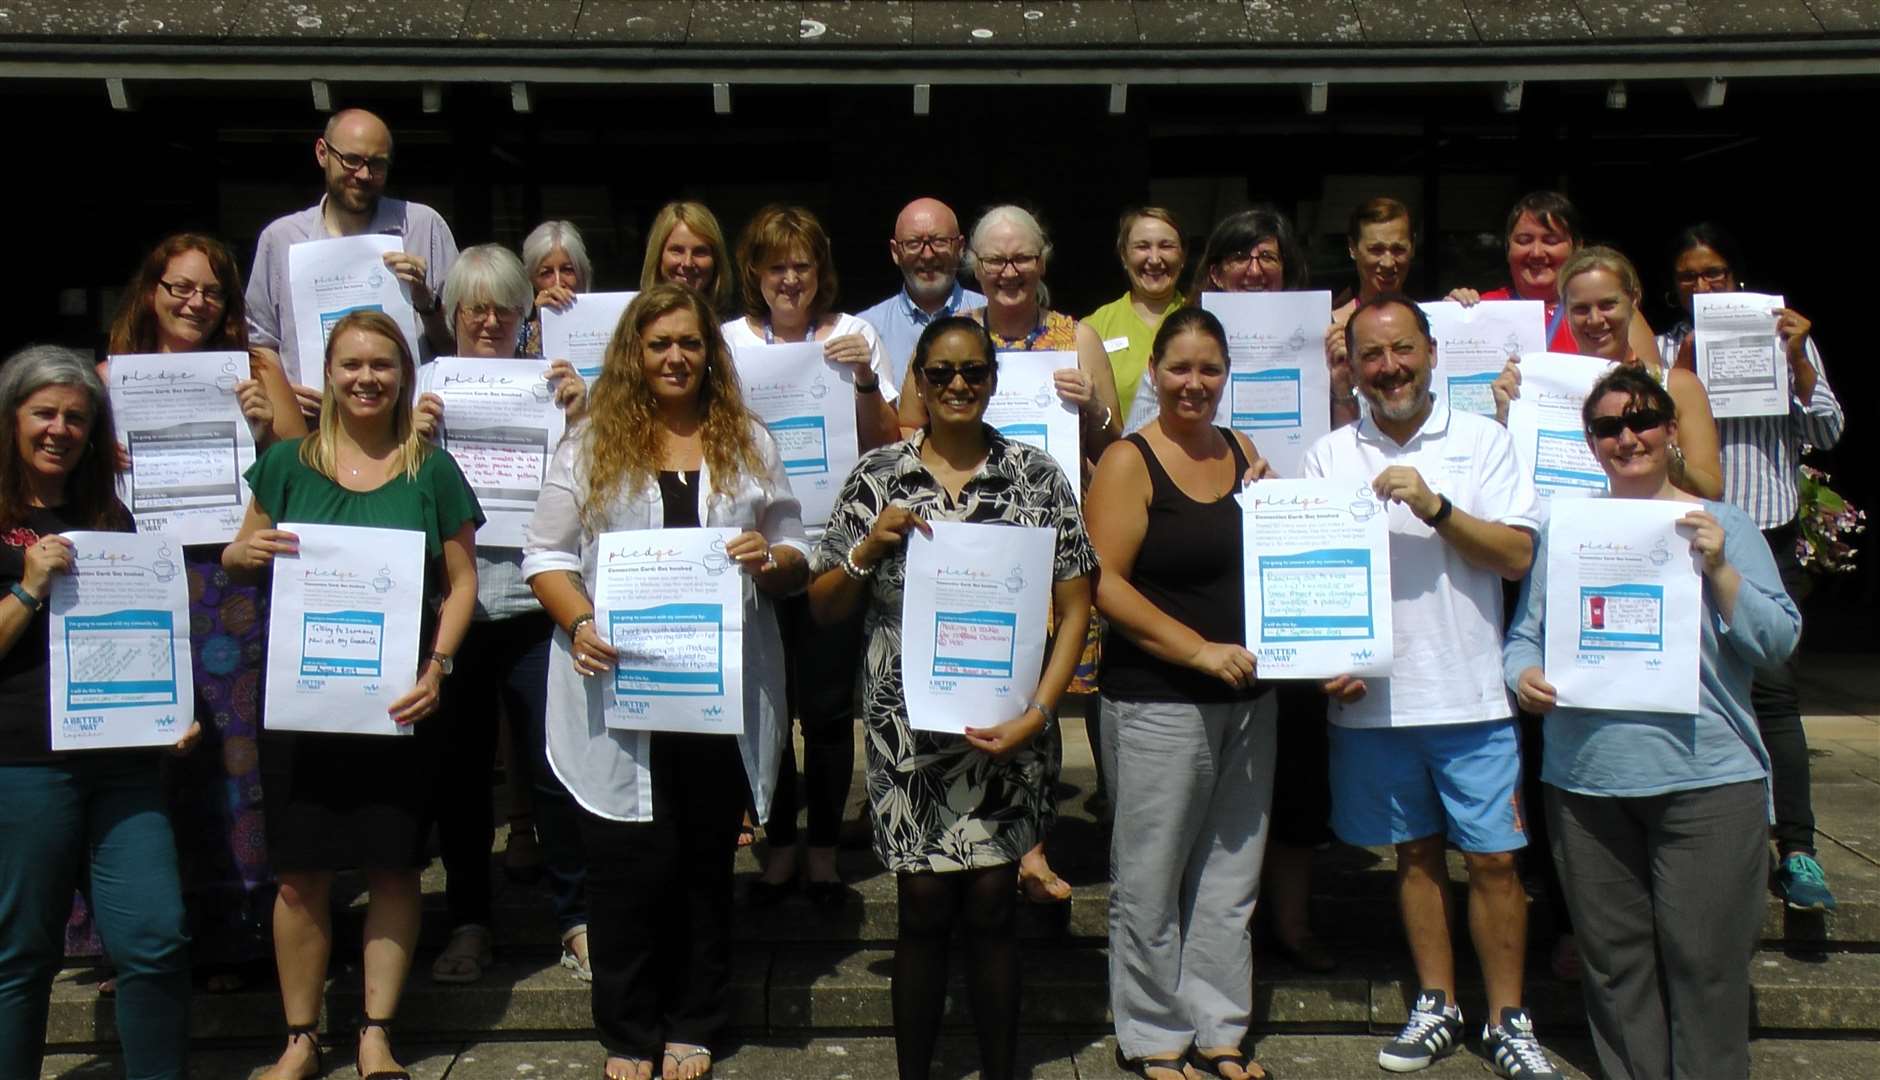 Improve health and wellbeing in Medway when you become A Better Medway Champion.